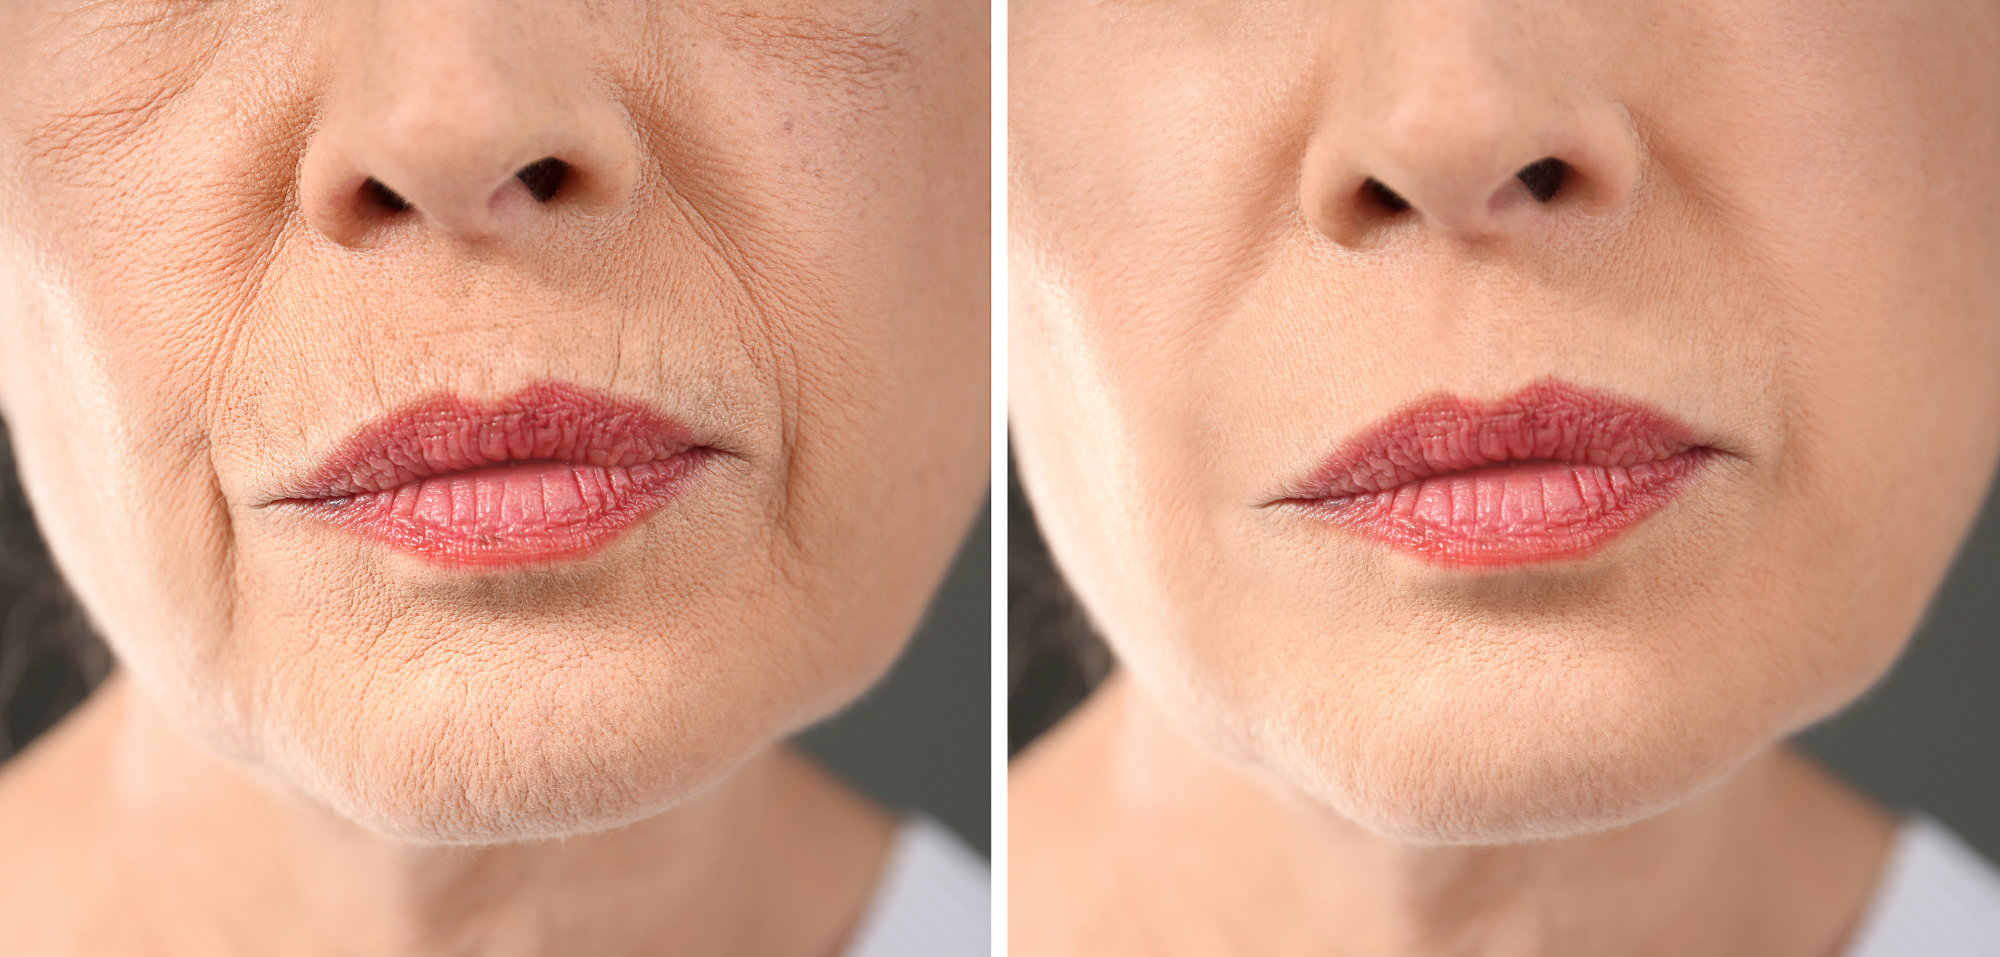 https://www.usmagazine.com/wp-content/uploads/2023/04/dermelect-smooth-upper-lip-professional-perioral-anti-aging-treatment.jpg?quality=86&strip=all